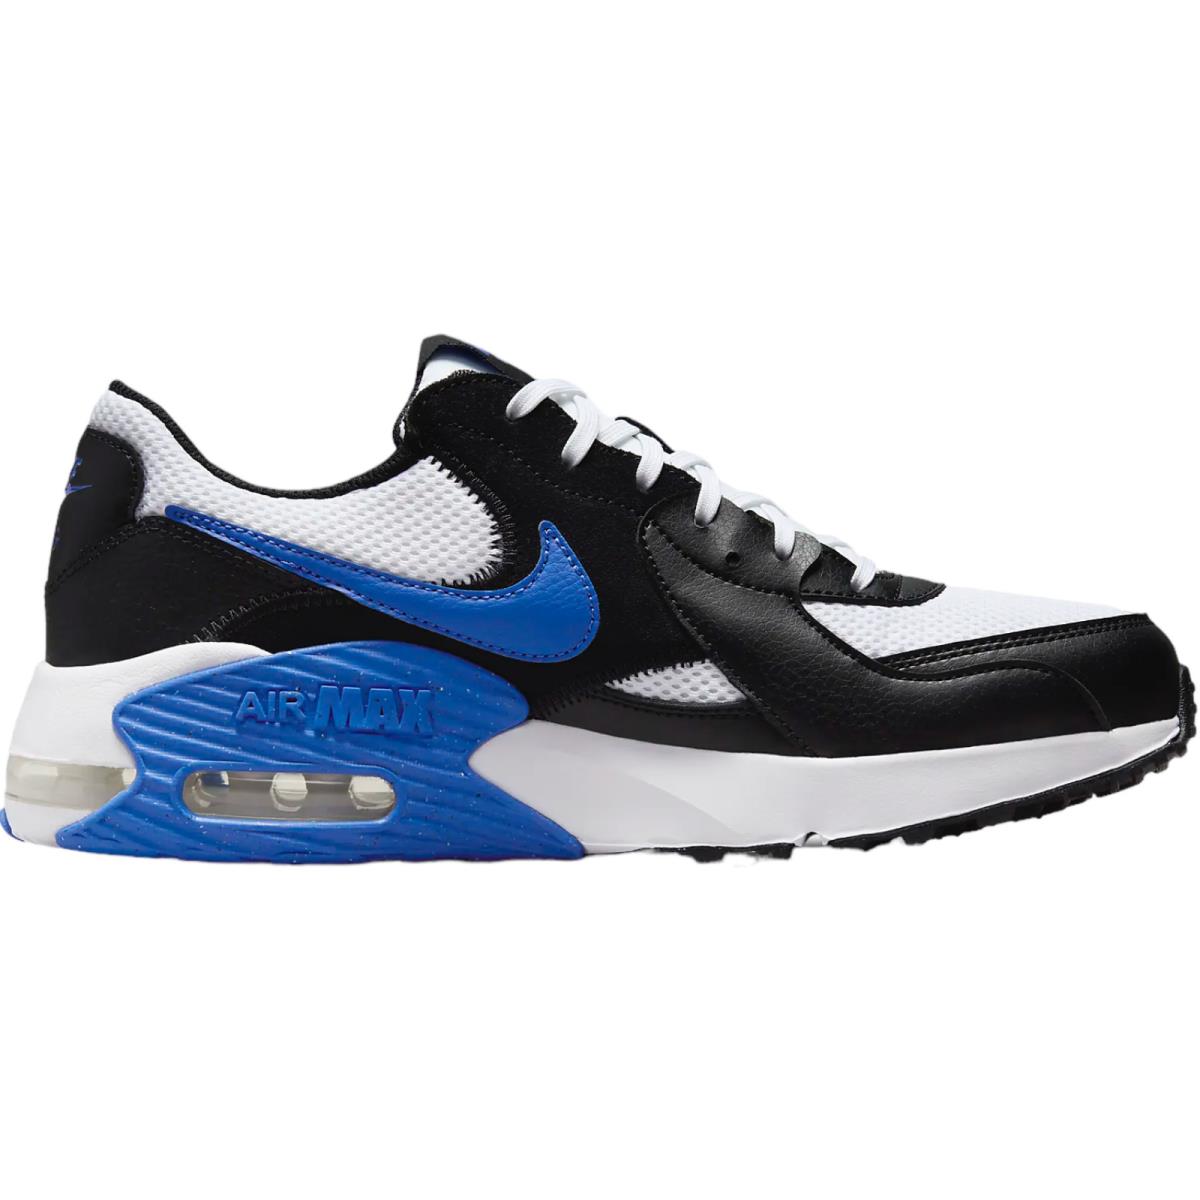 Nike Air Max Excee Men`s Casual Shoes All Colors US Sizes 7-14 Black/White/Game Royal